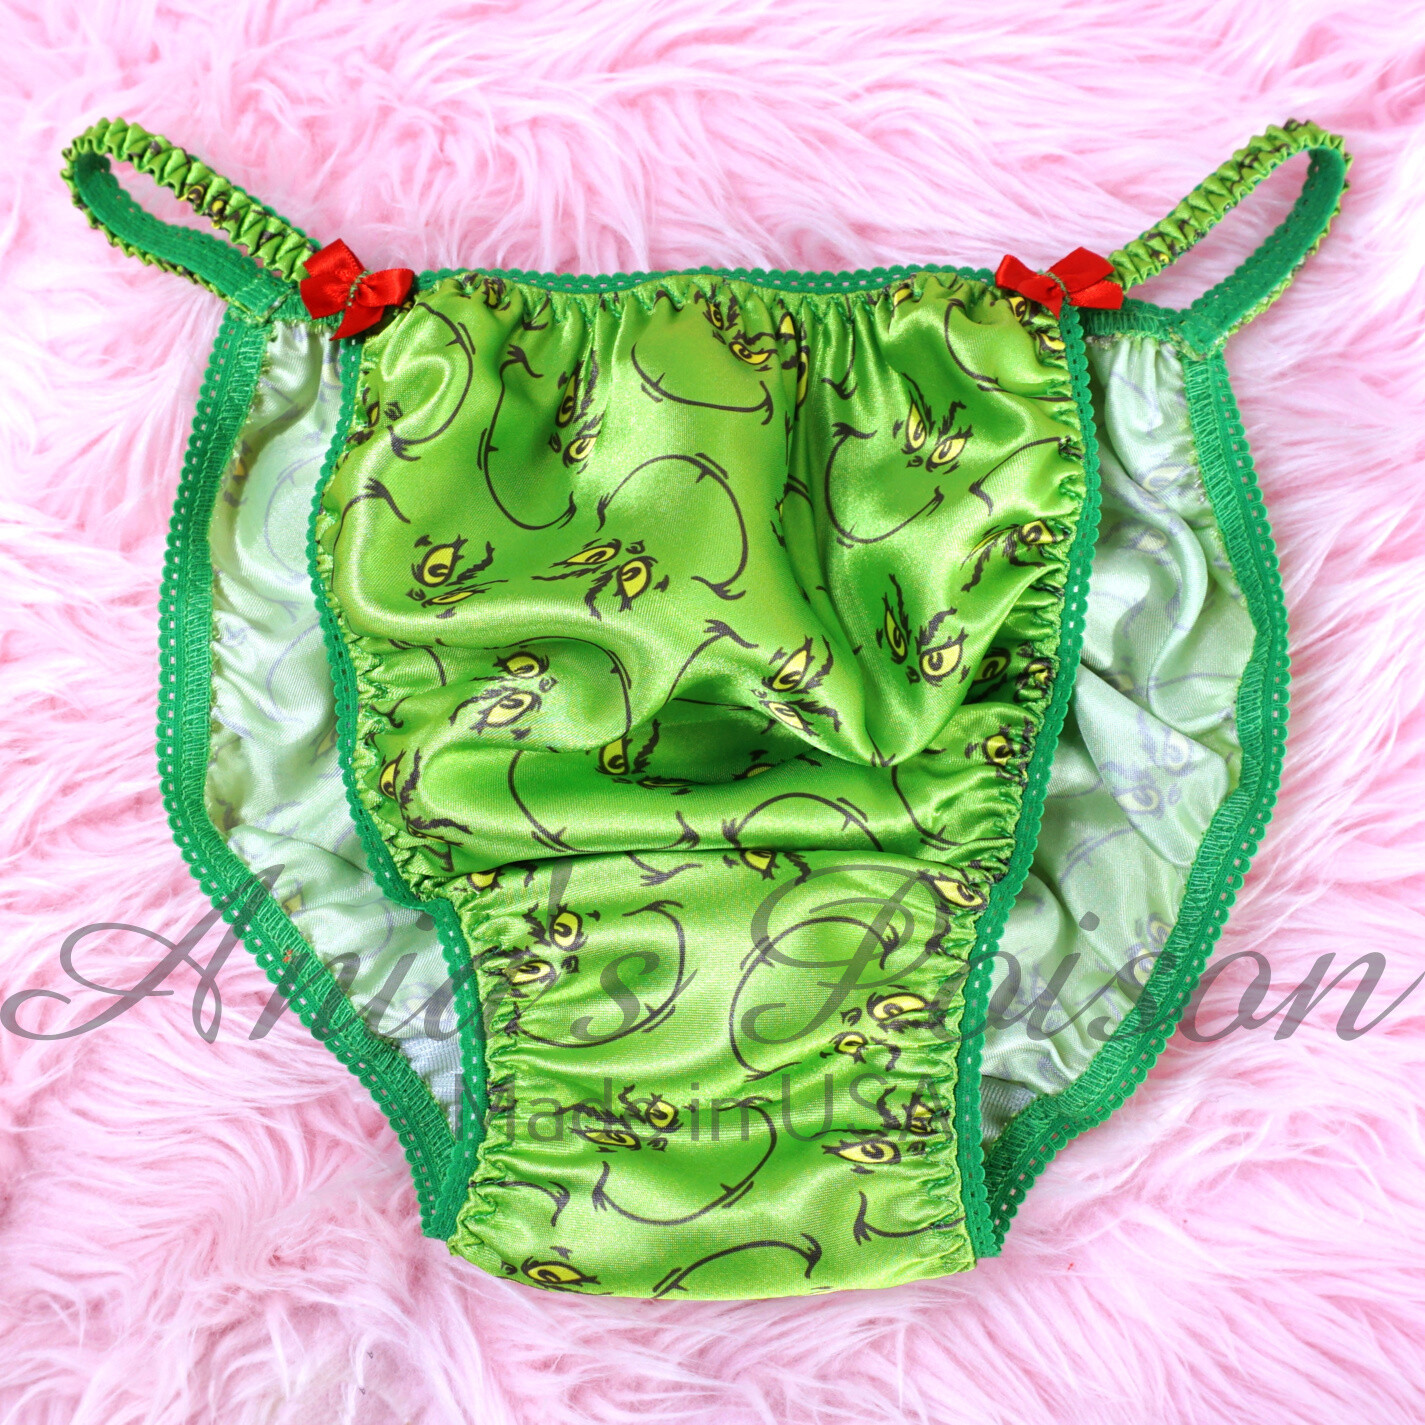 Christmas Ania's Poison sissy MENS SATIN Green Grouch wet look Mens holiday panties sz S-XXL